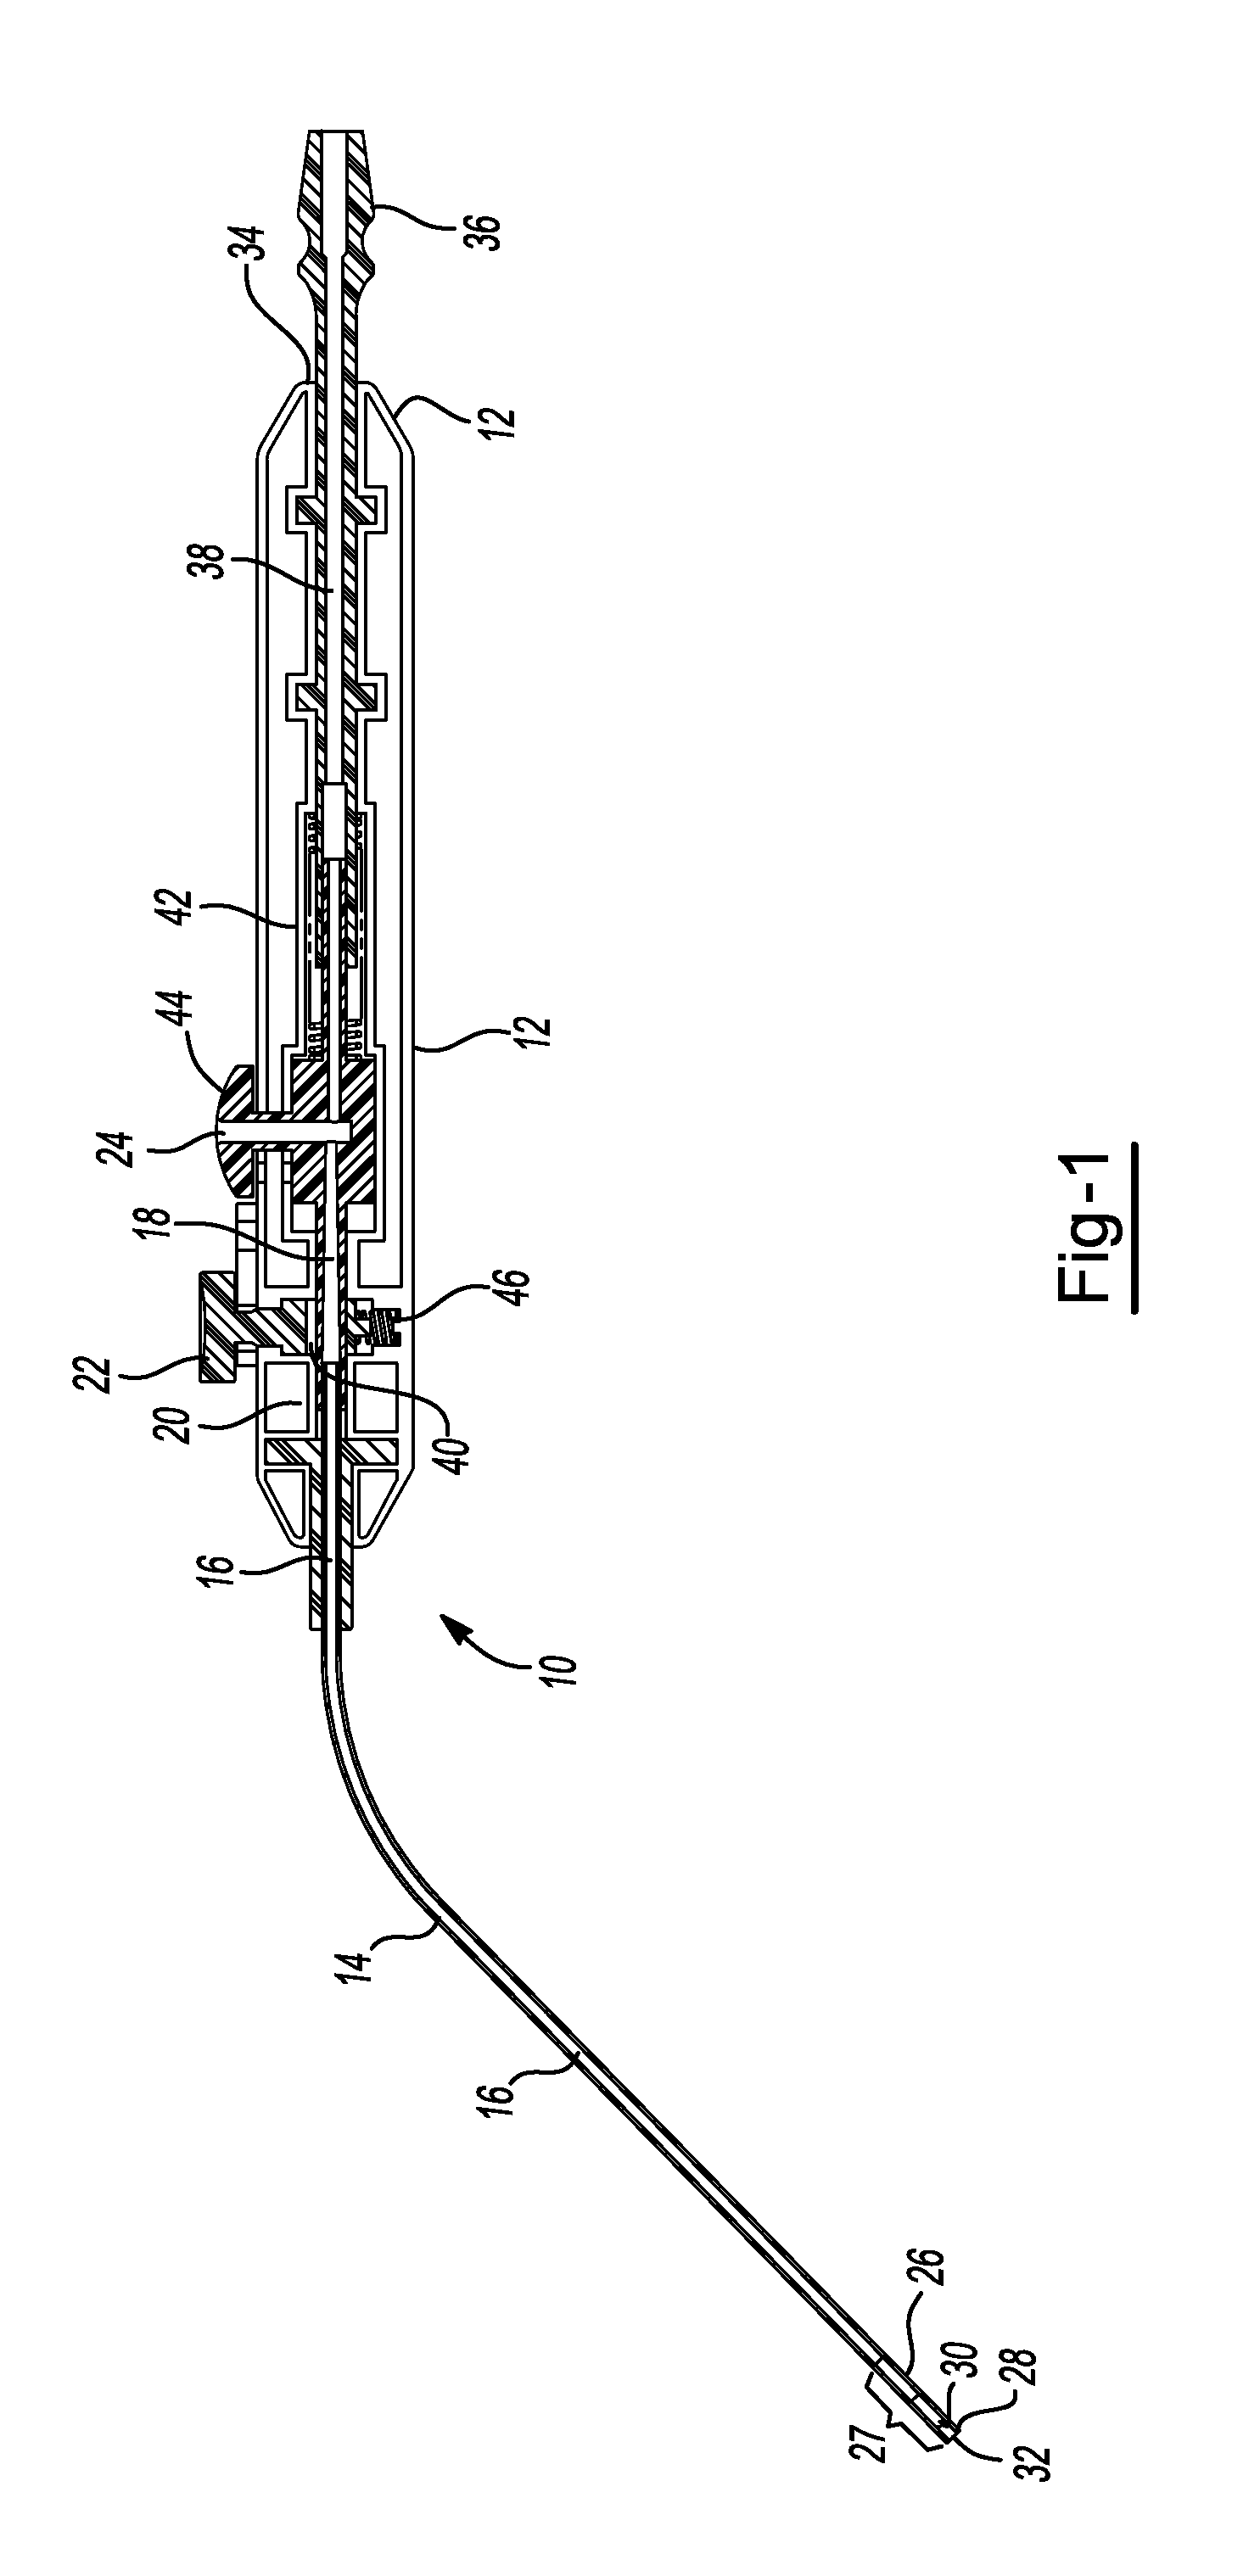 Ear pressure equalizing tube and insertion device